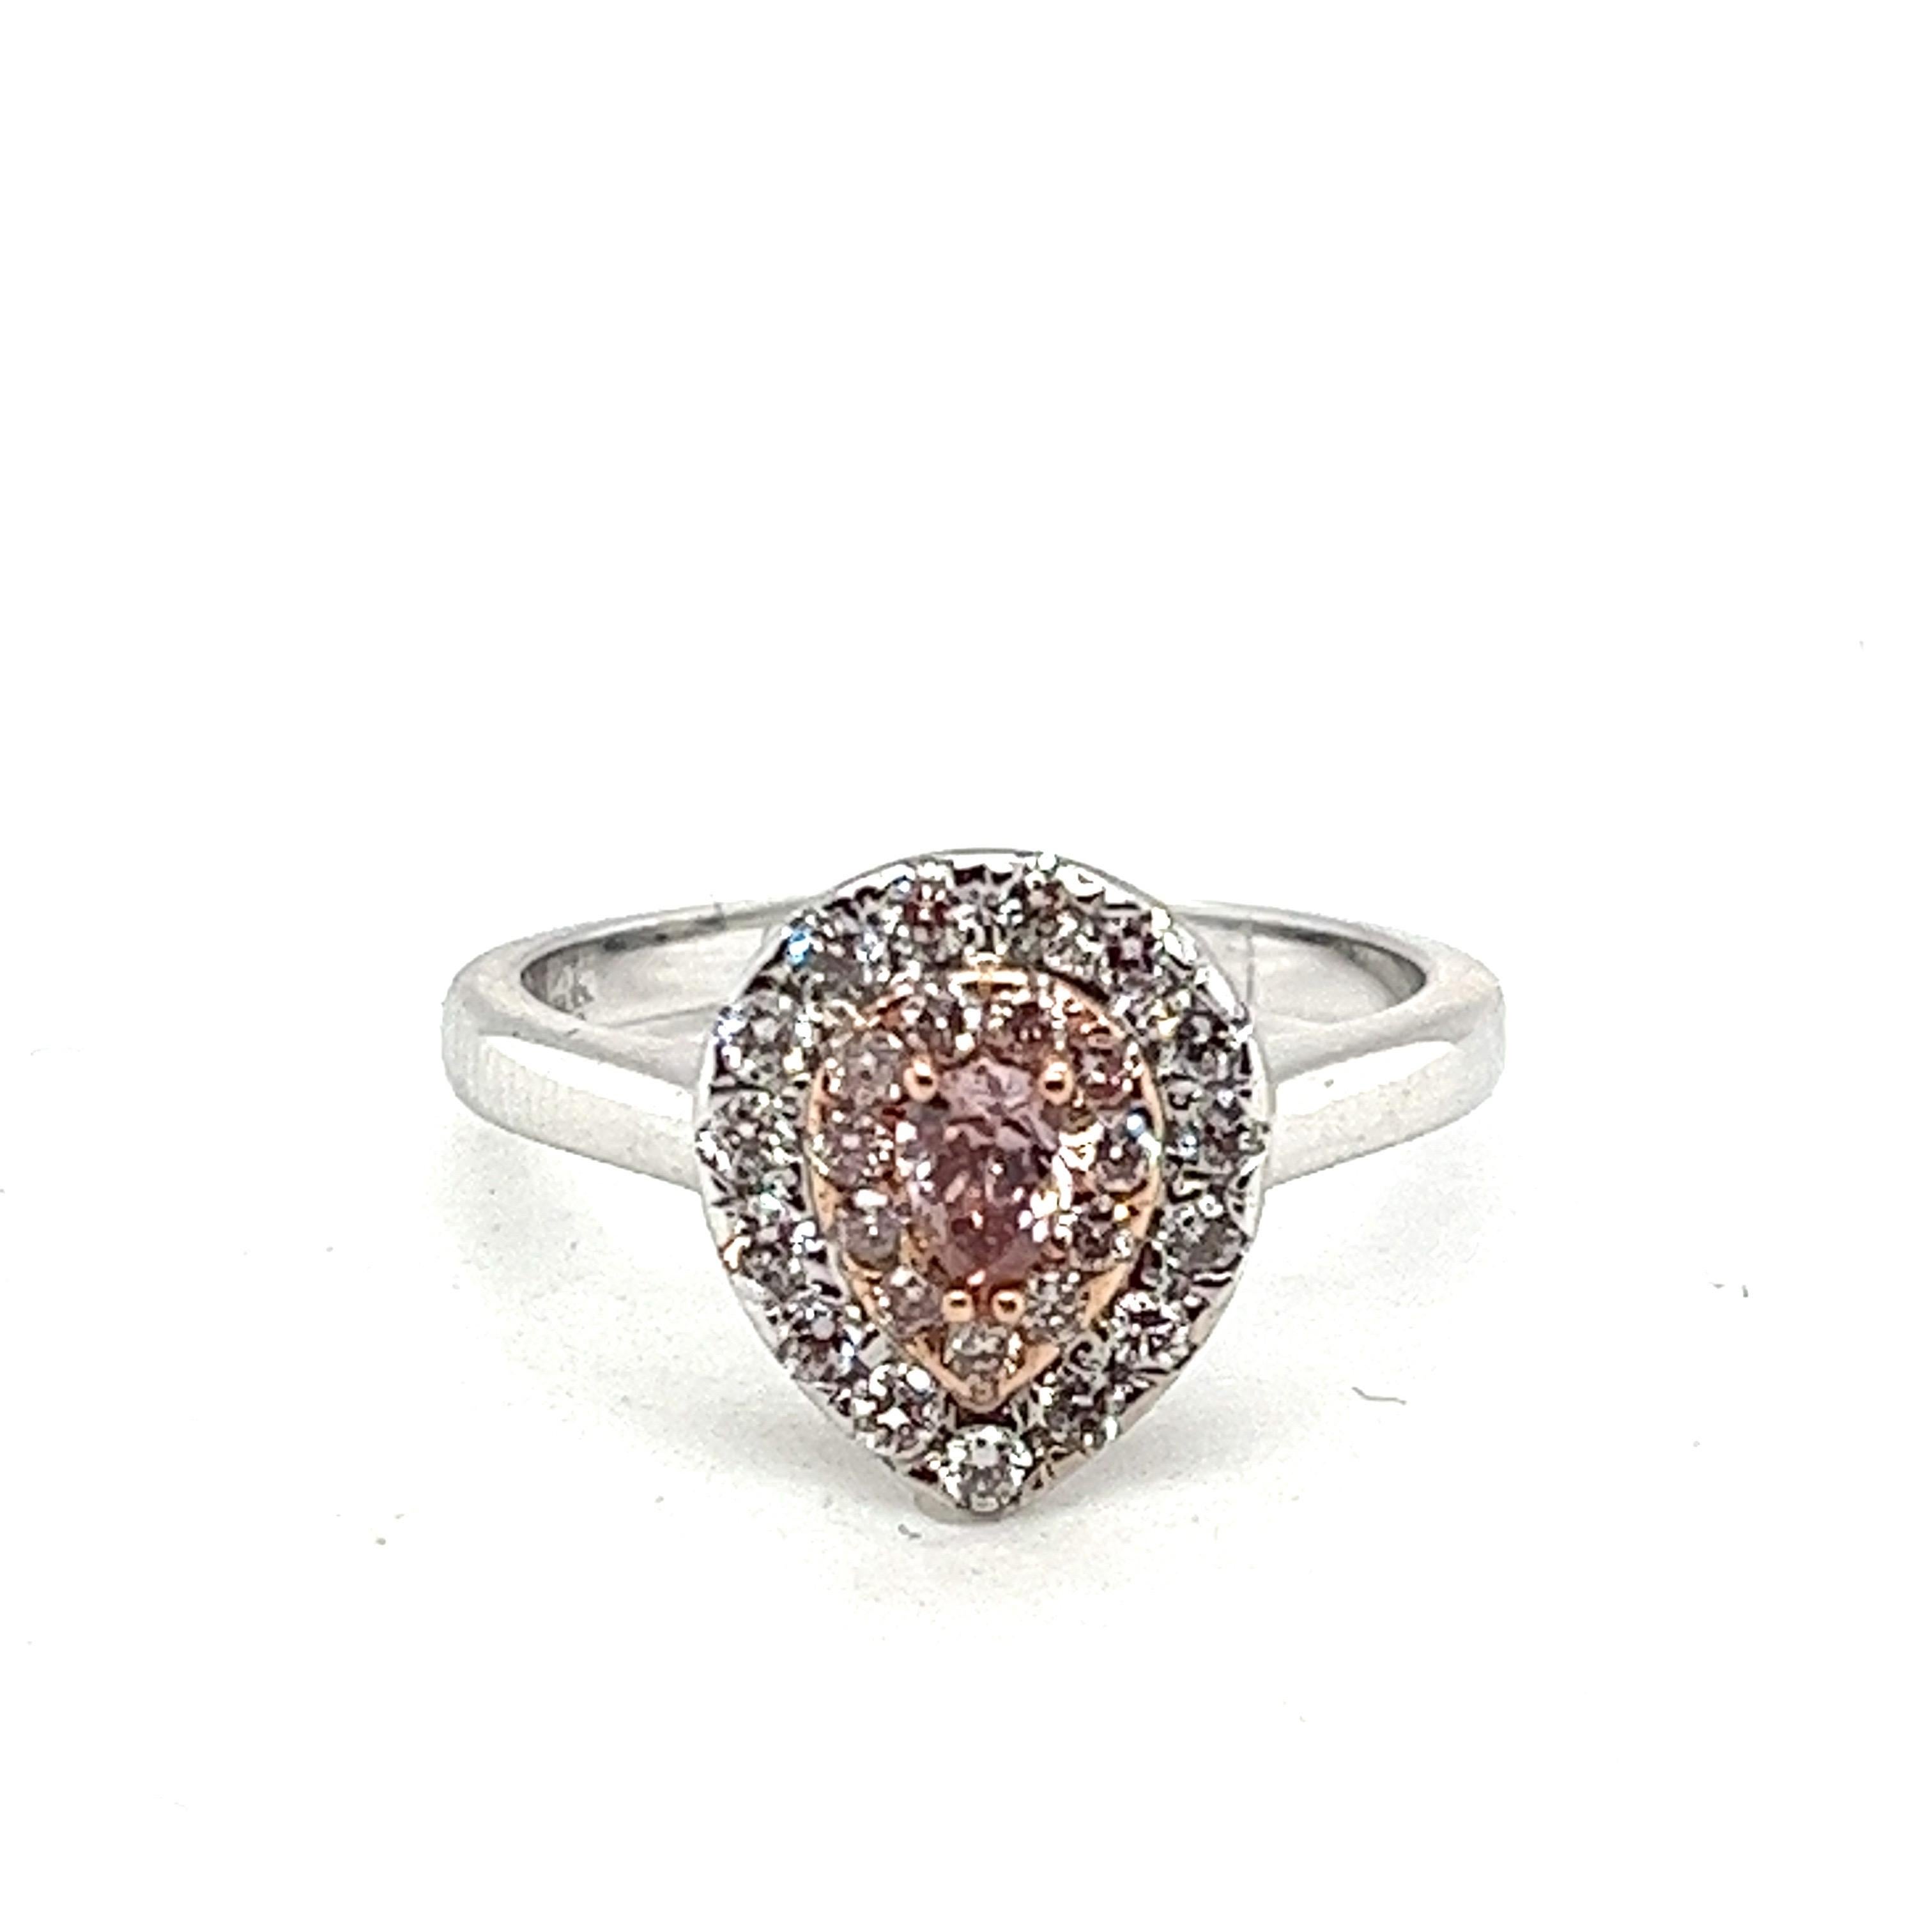 Elegance takes a captivating form in this exquisite pear-shaped ring, a masterpiece designed to enchant. Crafted in lustrous 14kt white gold, it boasts a rare natural earth mined pear-shaped pink diamond at its heart, a mesmerizing 0.18 carat gem